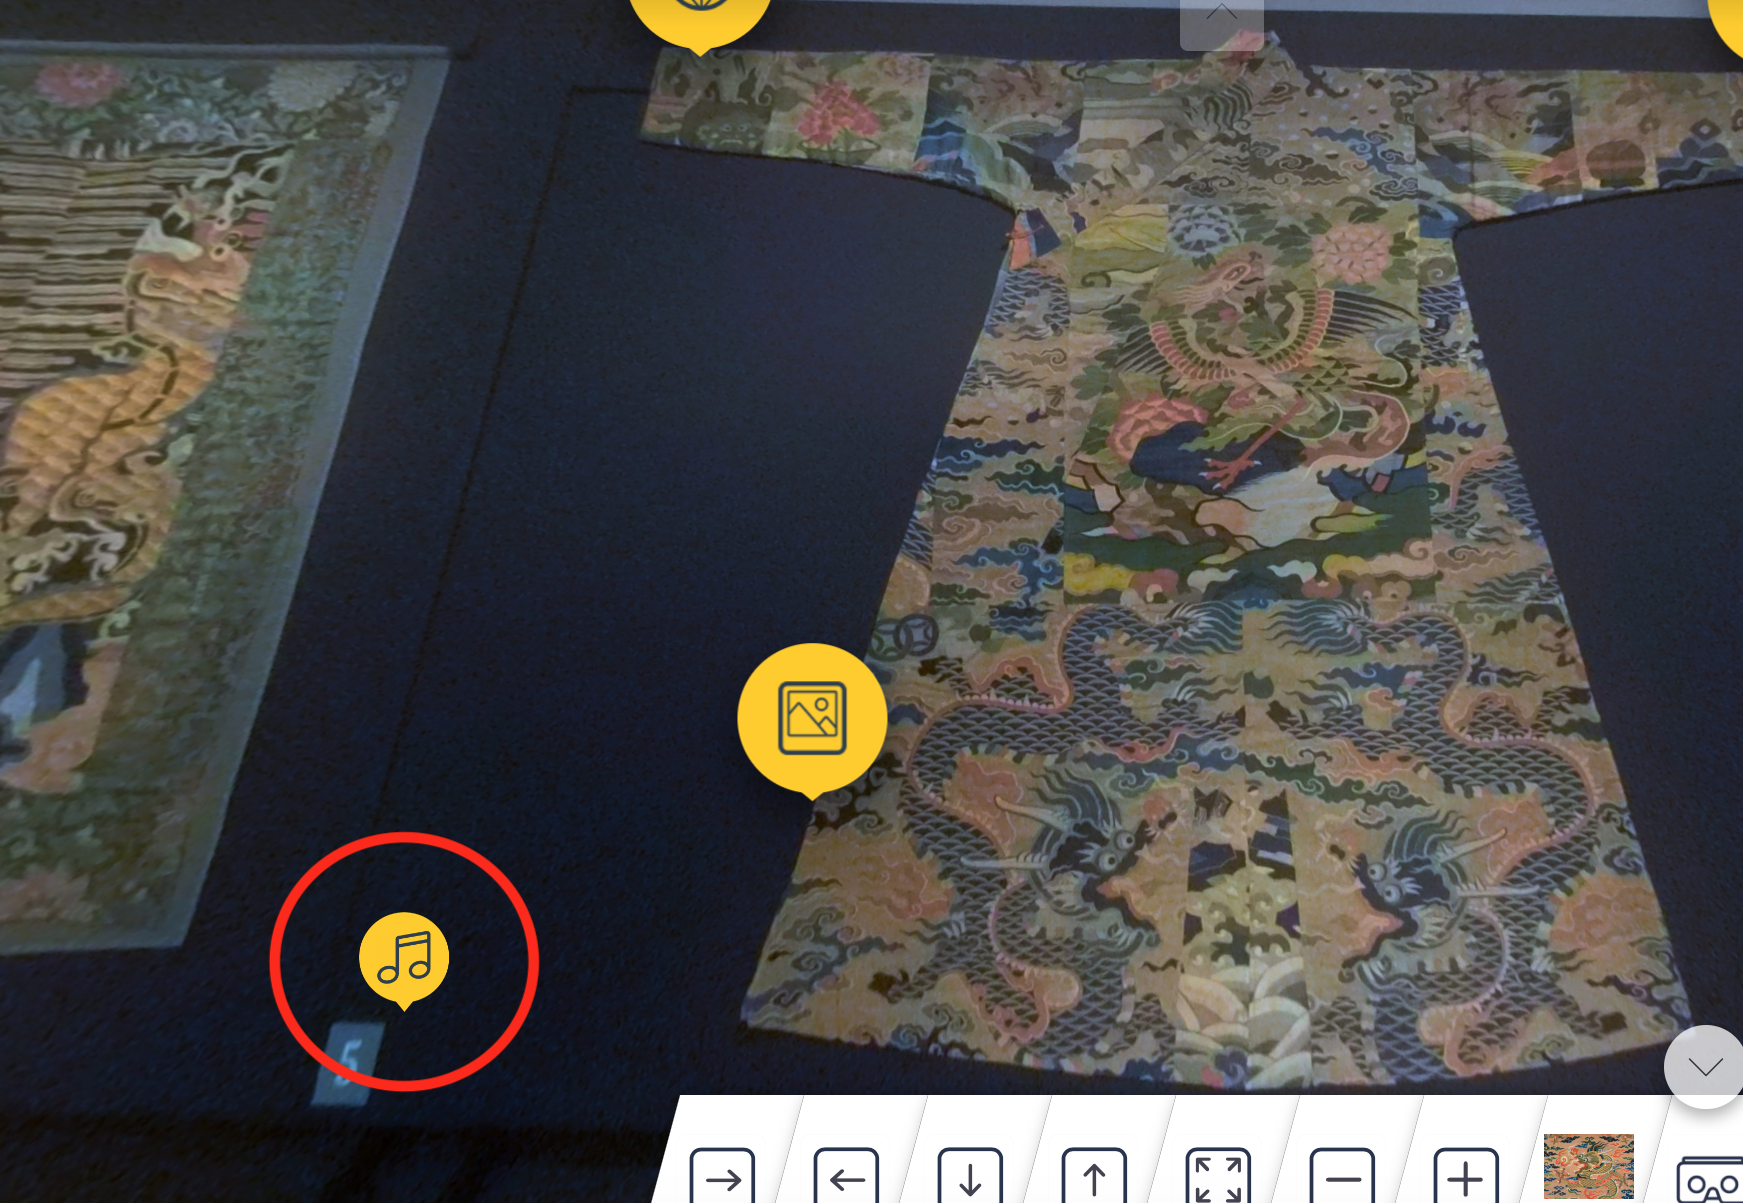 screen on VR tour with yellow icon with music notes circled to indicate this is where to click for the audio tour.